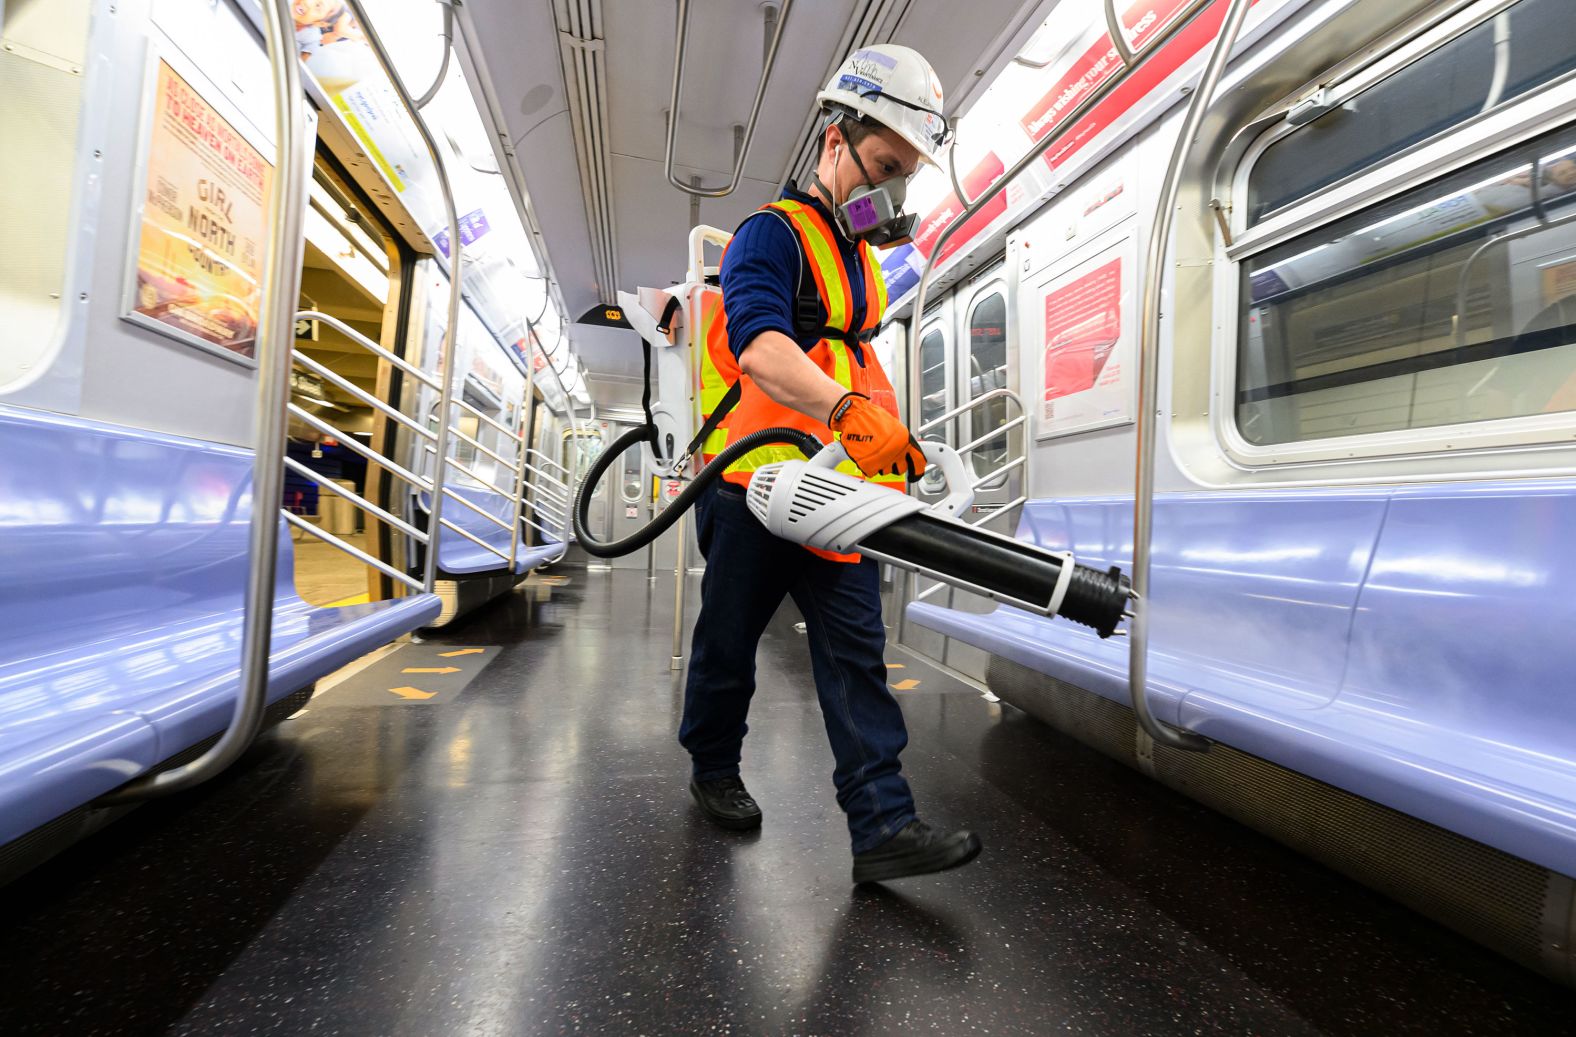 A cleaning contractor sprays disinfectant inside a New York subway car on May 23. The subway normally operates 24 hours a day, but it has been closed in the early morning hours for deep cleanings.